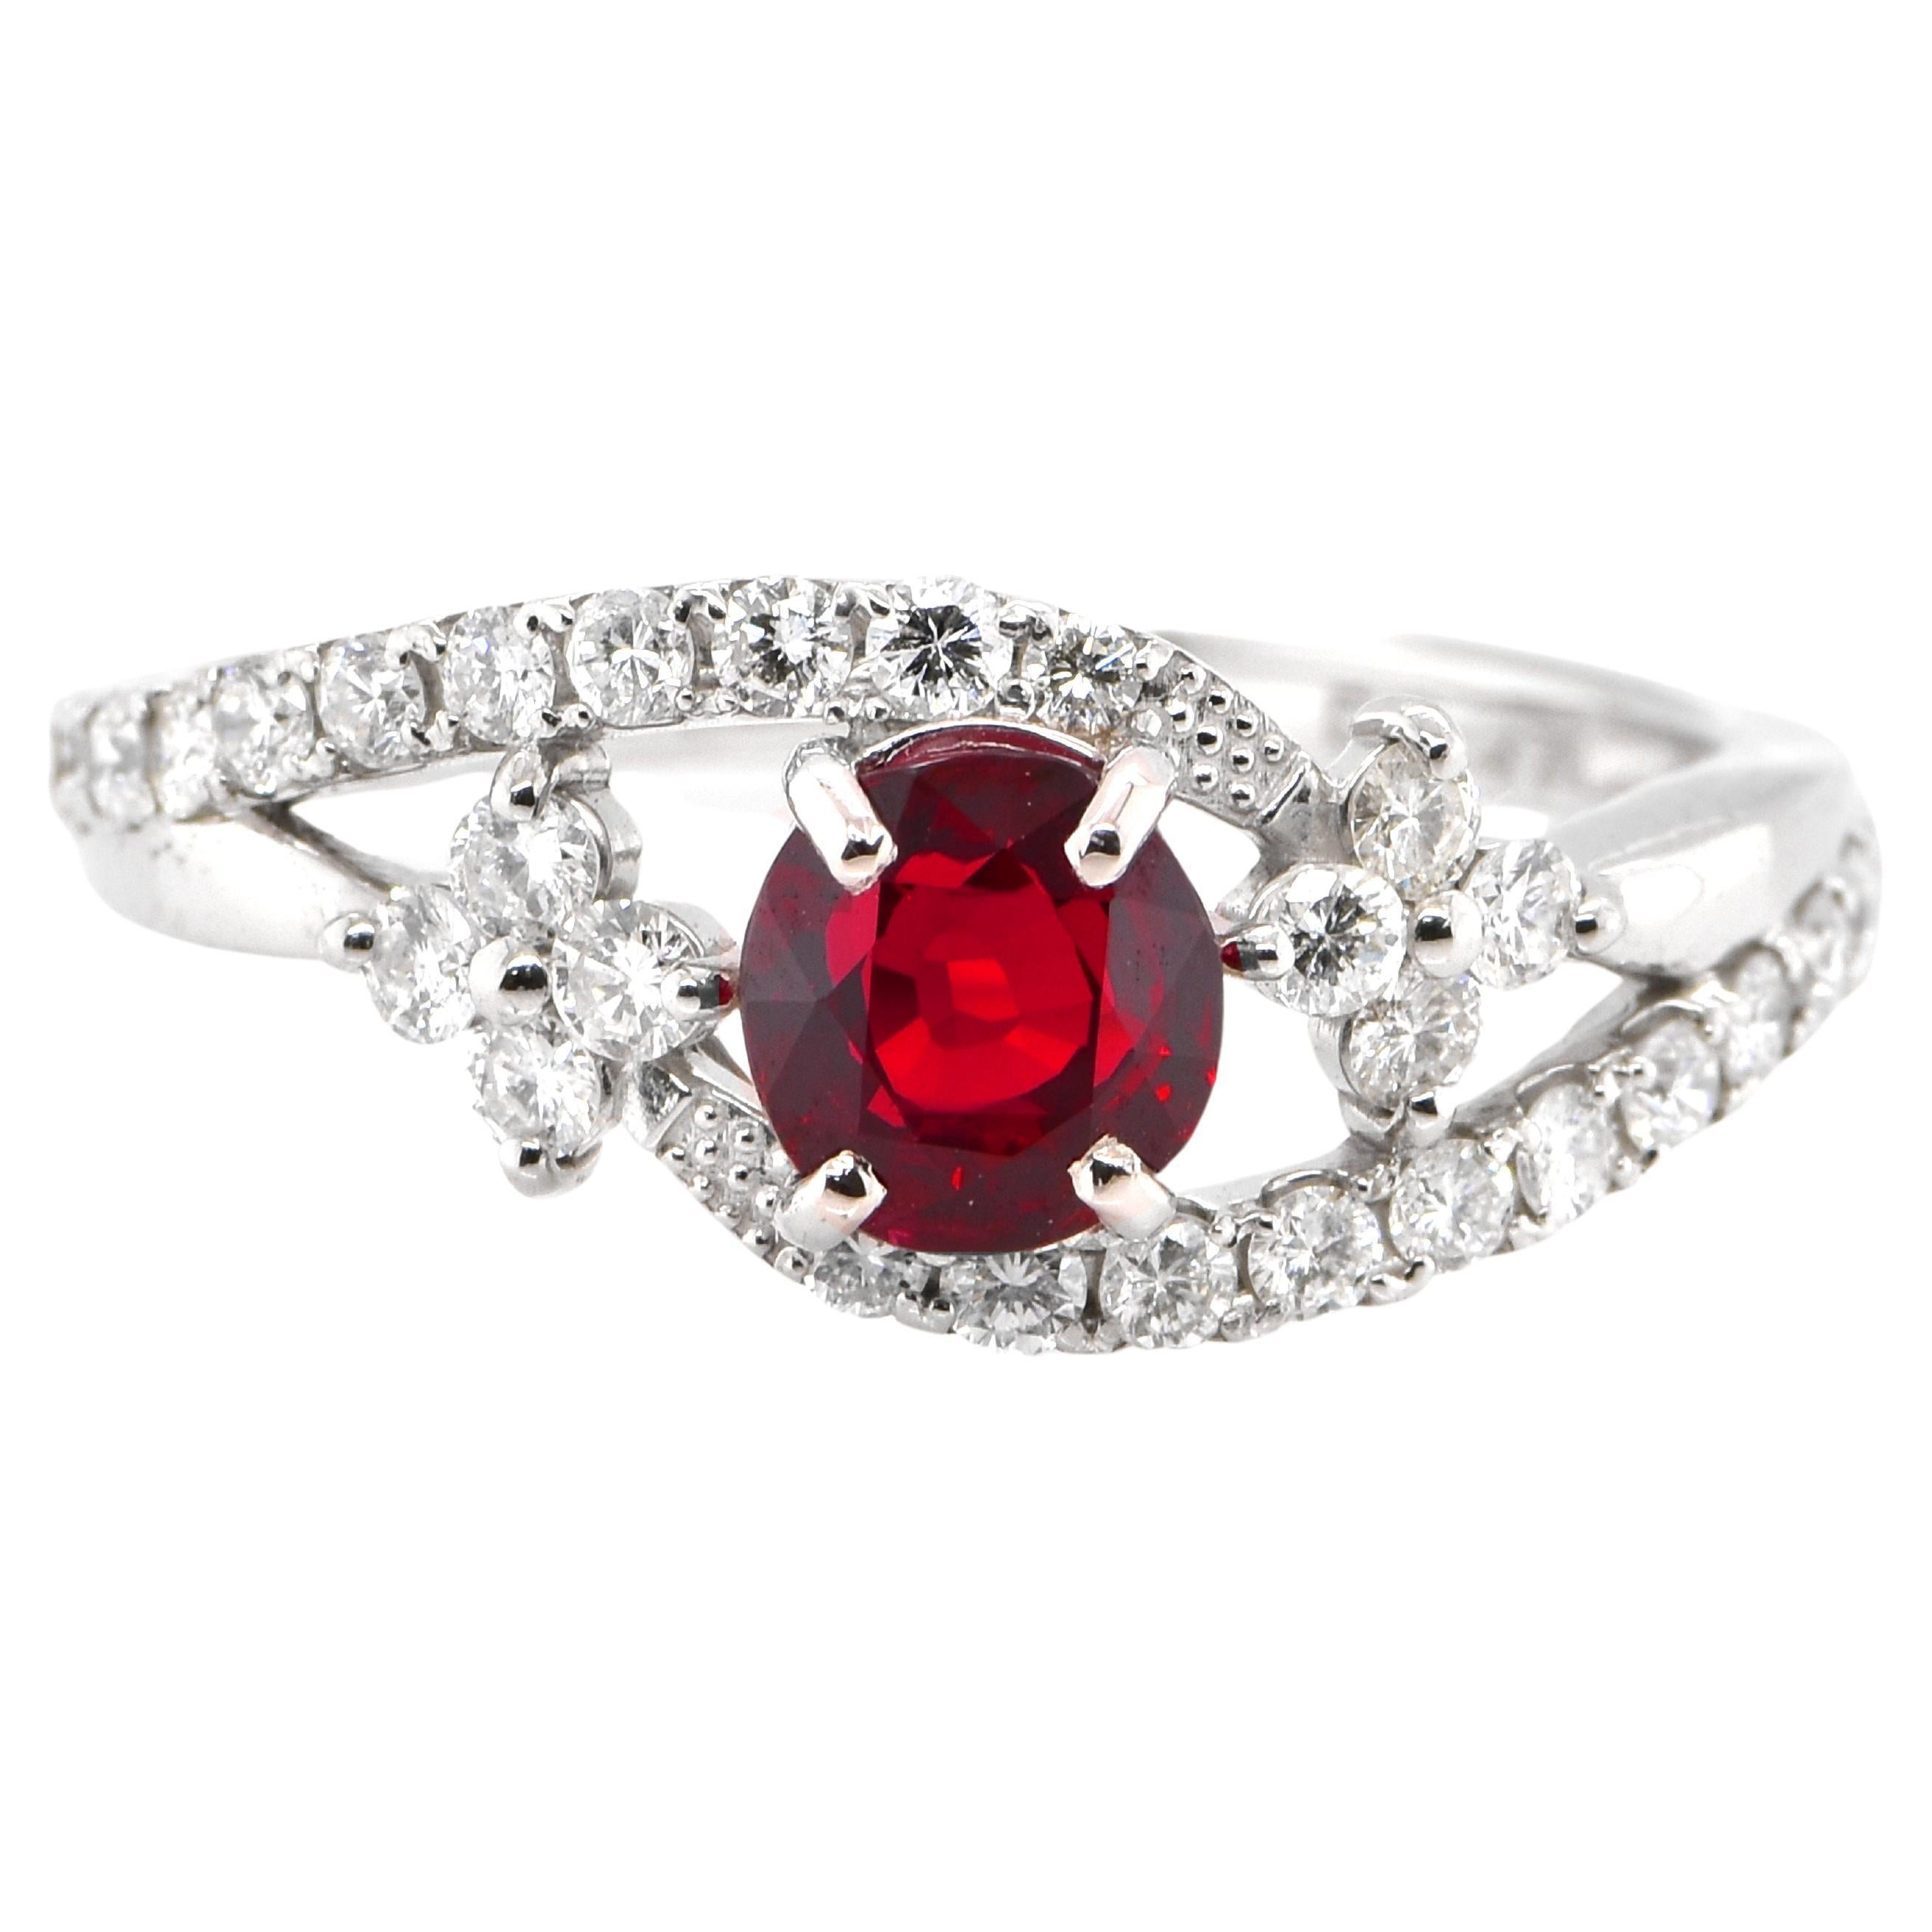 1.03 Carat Natural Vivid-Red Ruby and Diamond Ring Made in Platinum For Sale